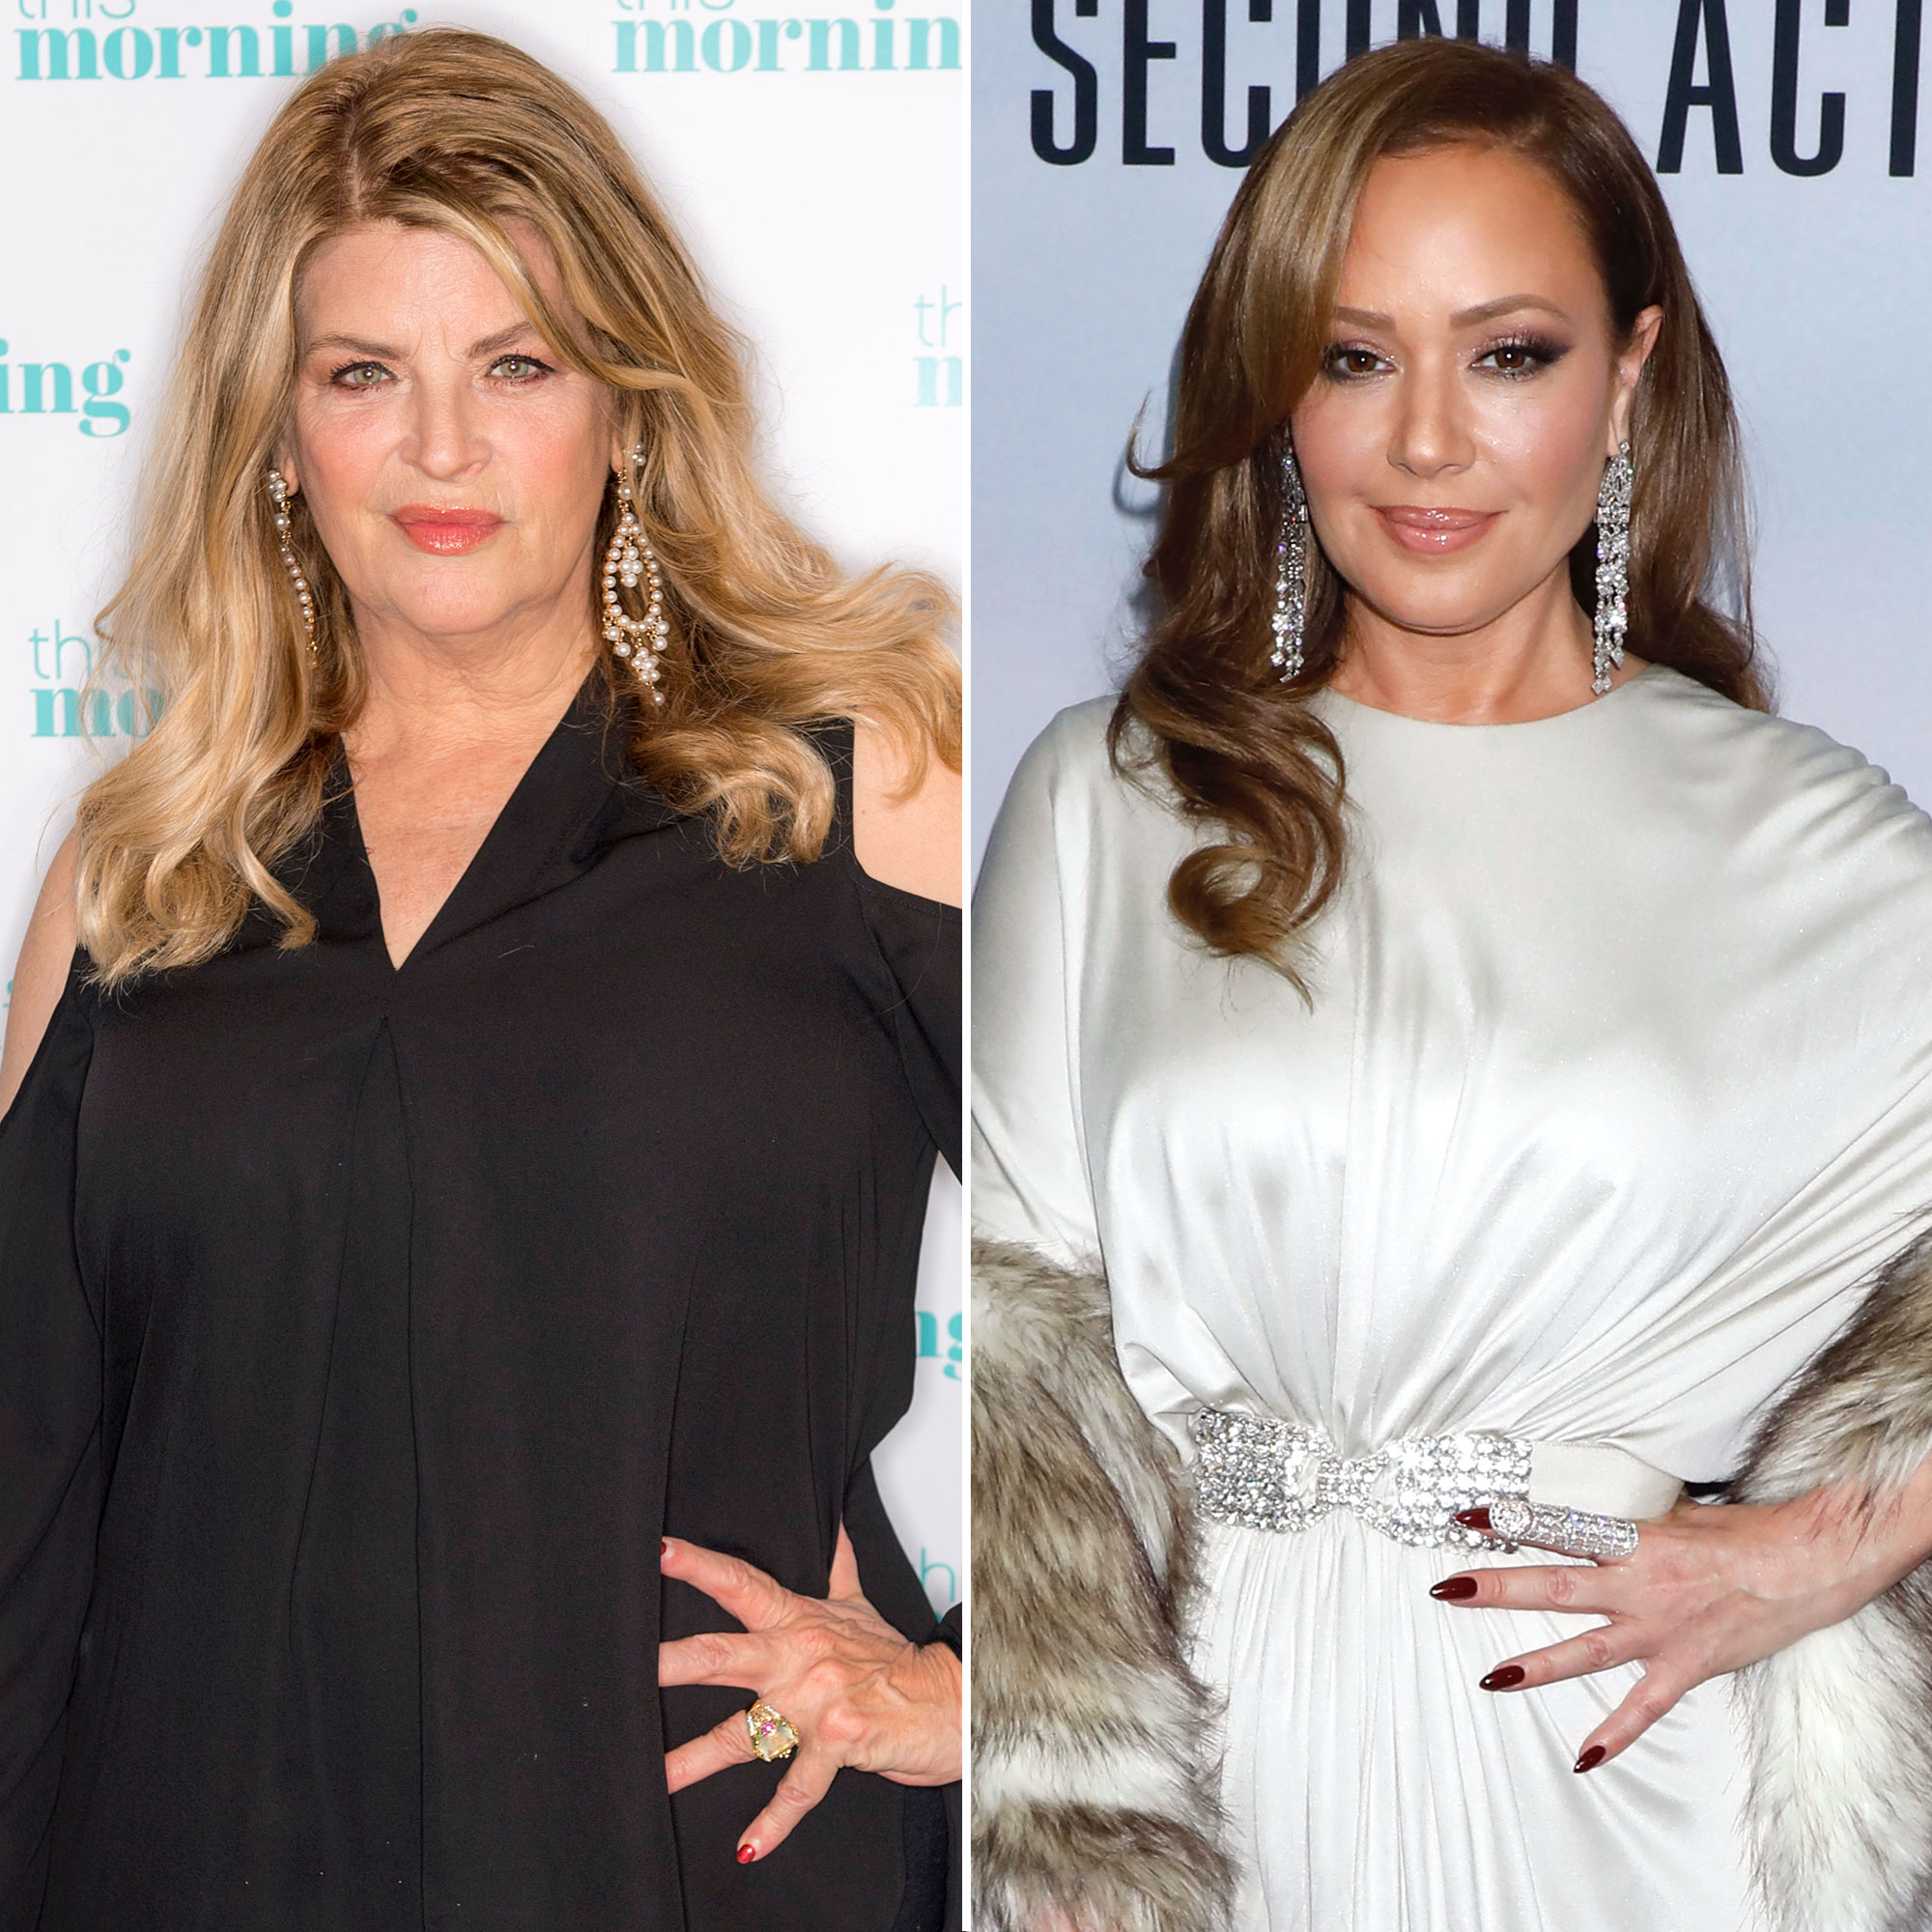 Kirstie Alley Lesbian Porn - Inside Kirstie Alley and Leah Remini's Feud Over Scientology